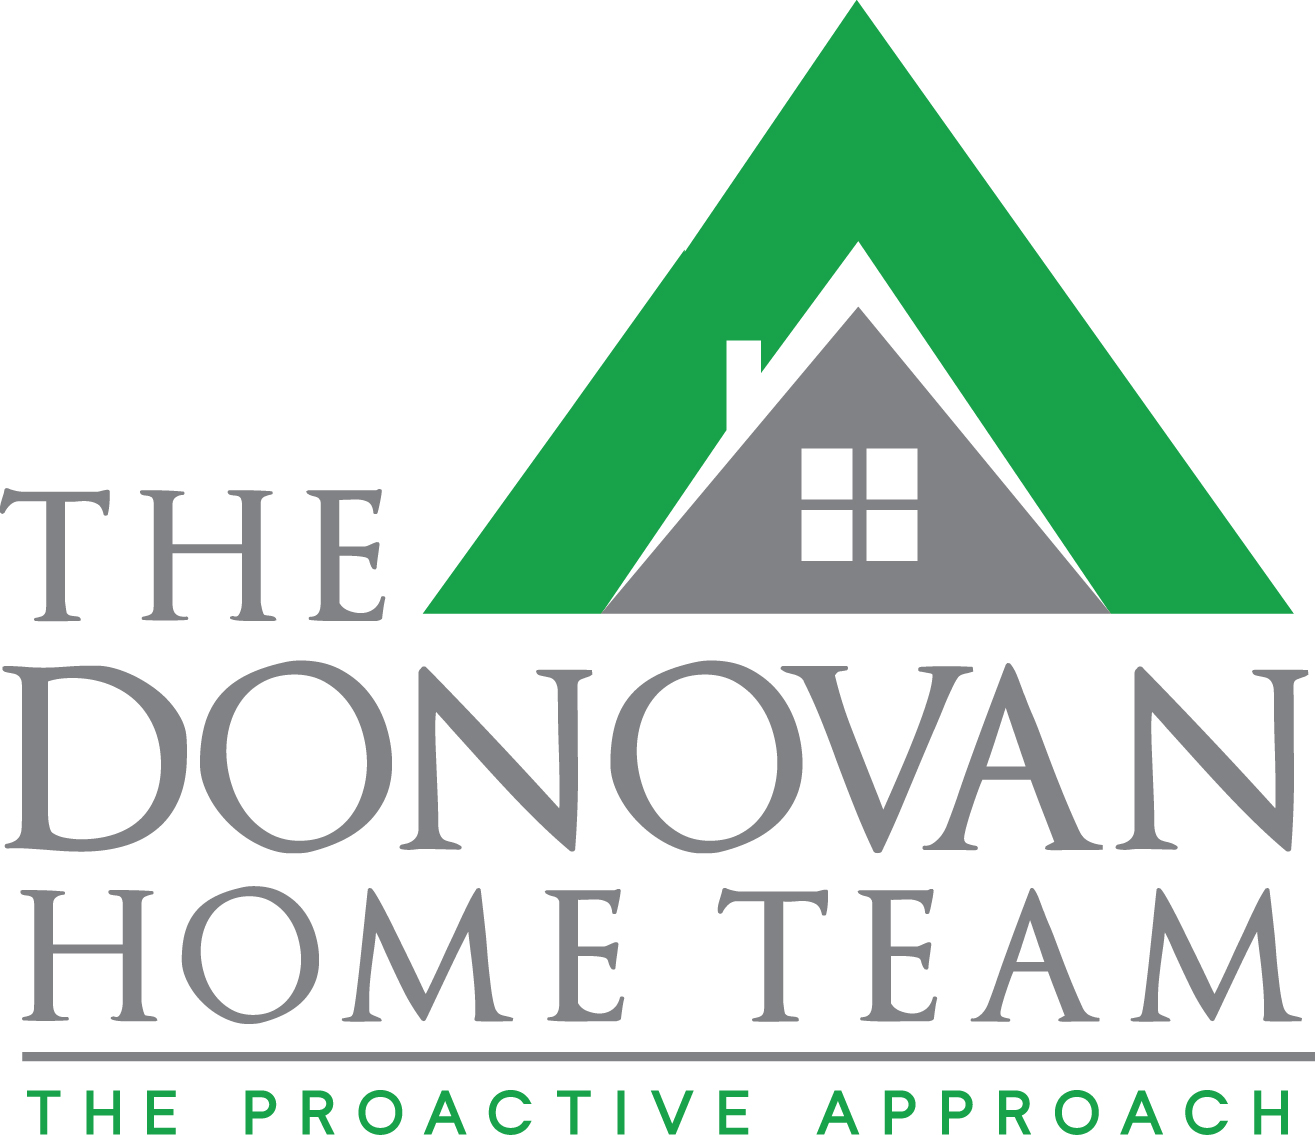  The Donovan Home Team uses Robert Miller Photography for real estate photography in Northern Virginia 